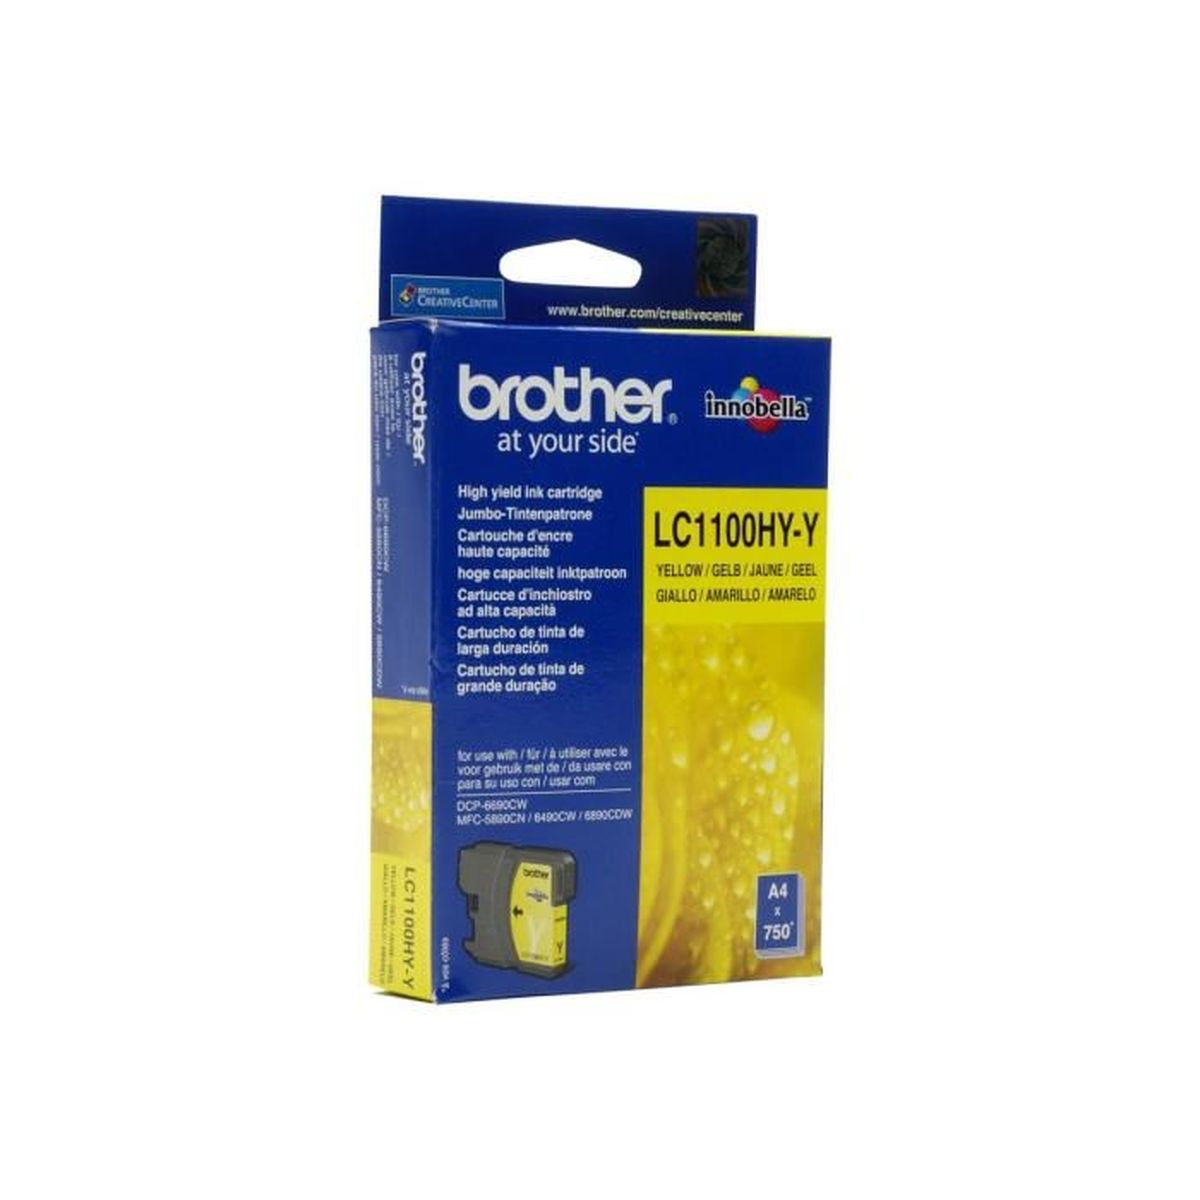 BROTHER LC-1100Y Tinte yellow (LC-1100Y)